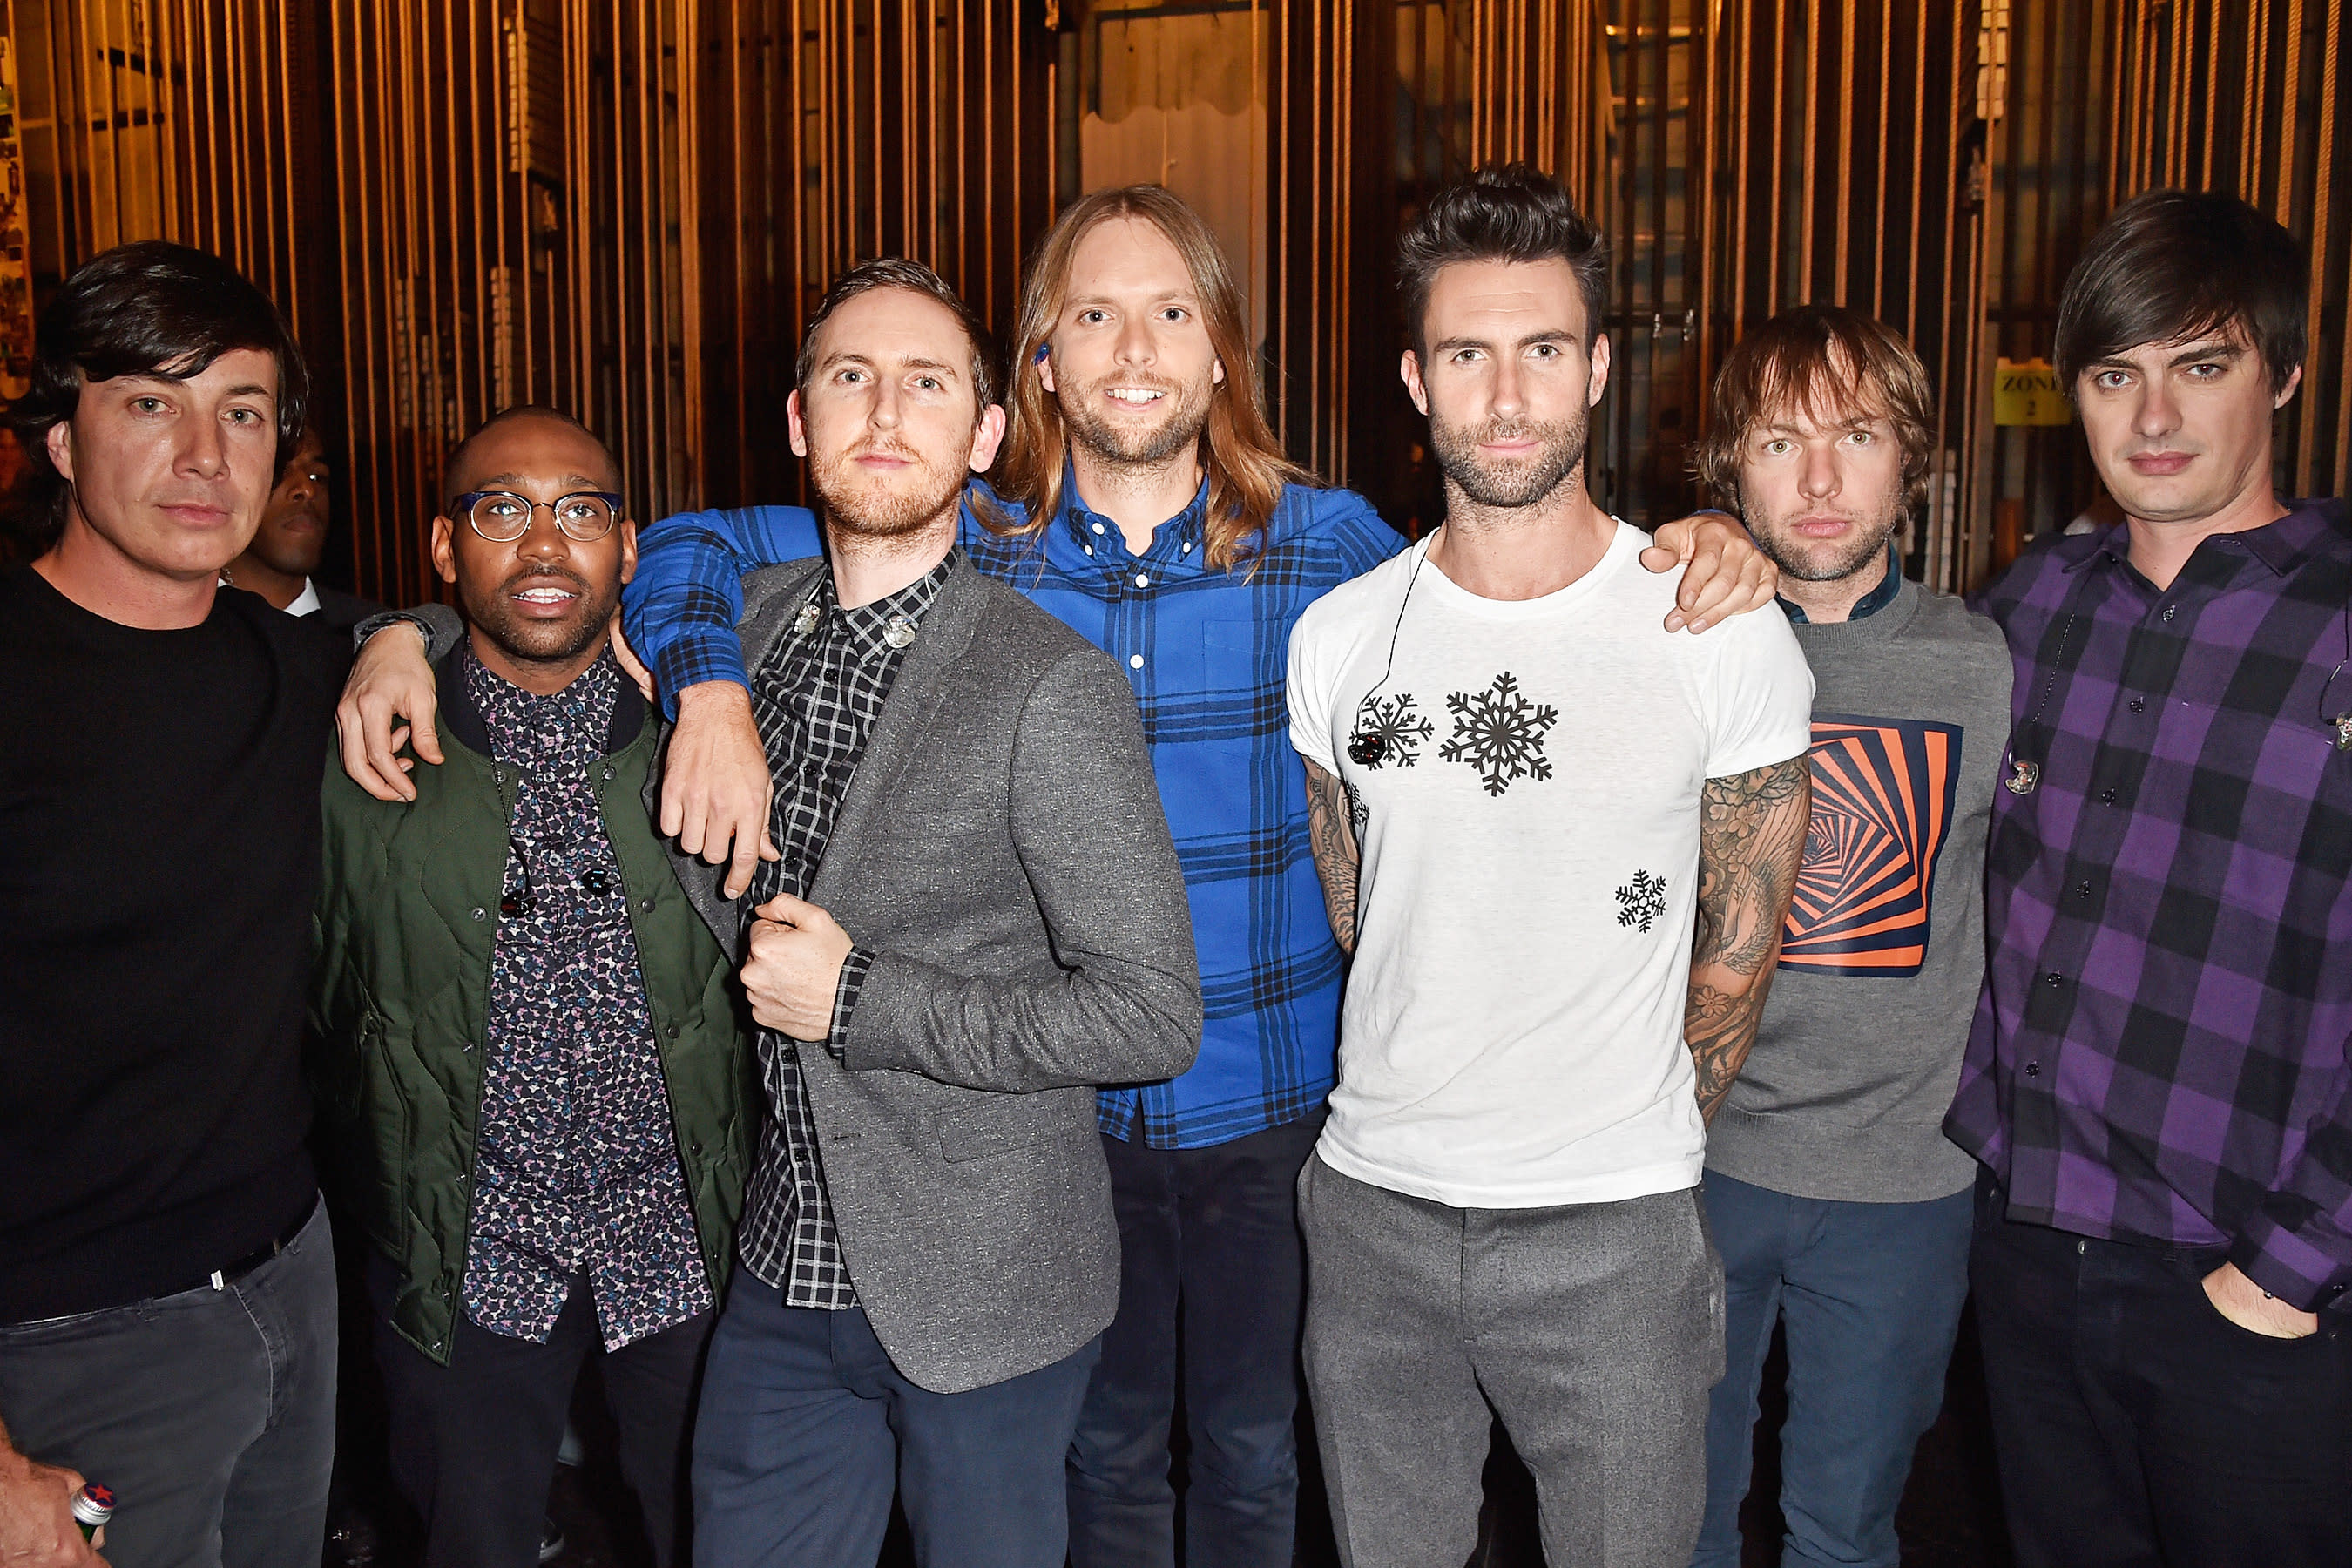 Pop band Maroon 5 returns for show at Blue Cross Arena in Rochester